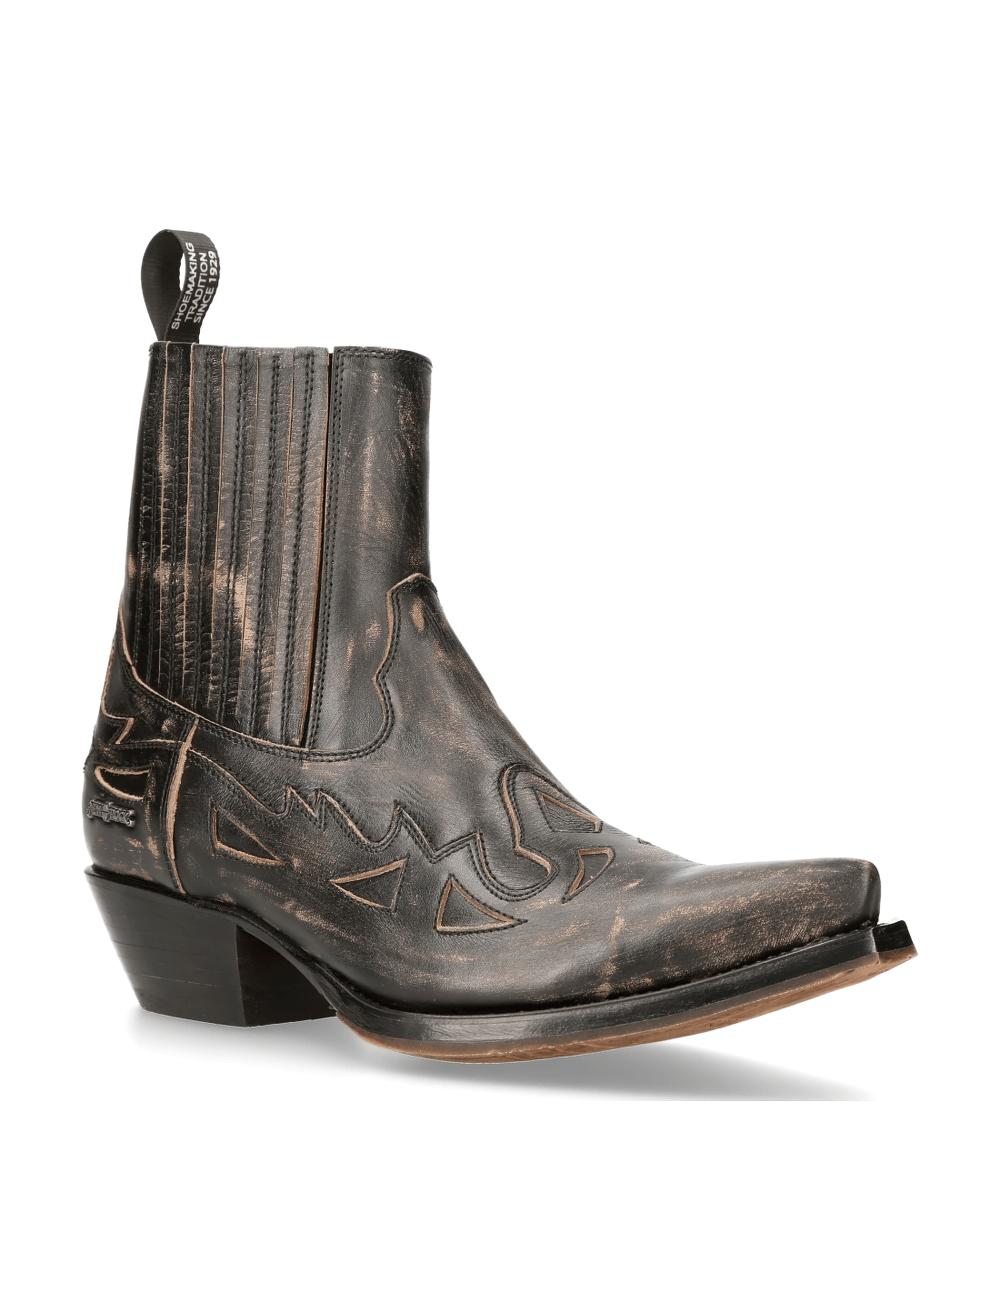 NEW ROCK Zipped Western Ankle Boots with Embossed Detail